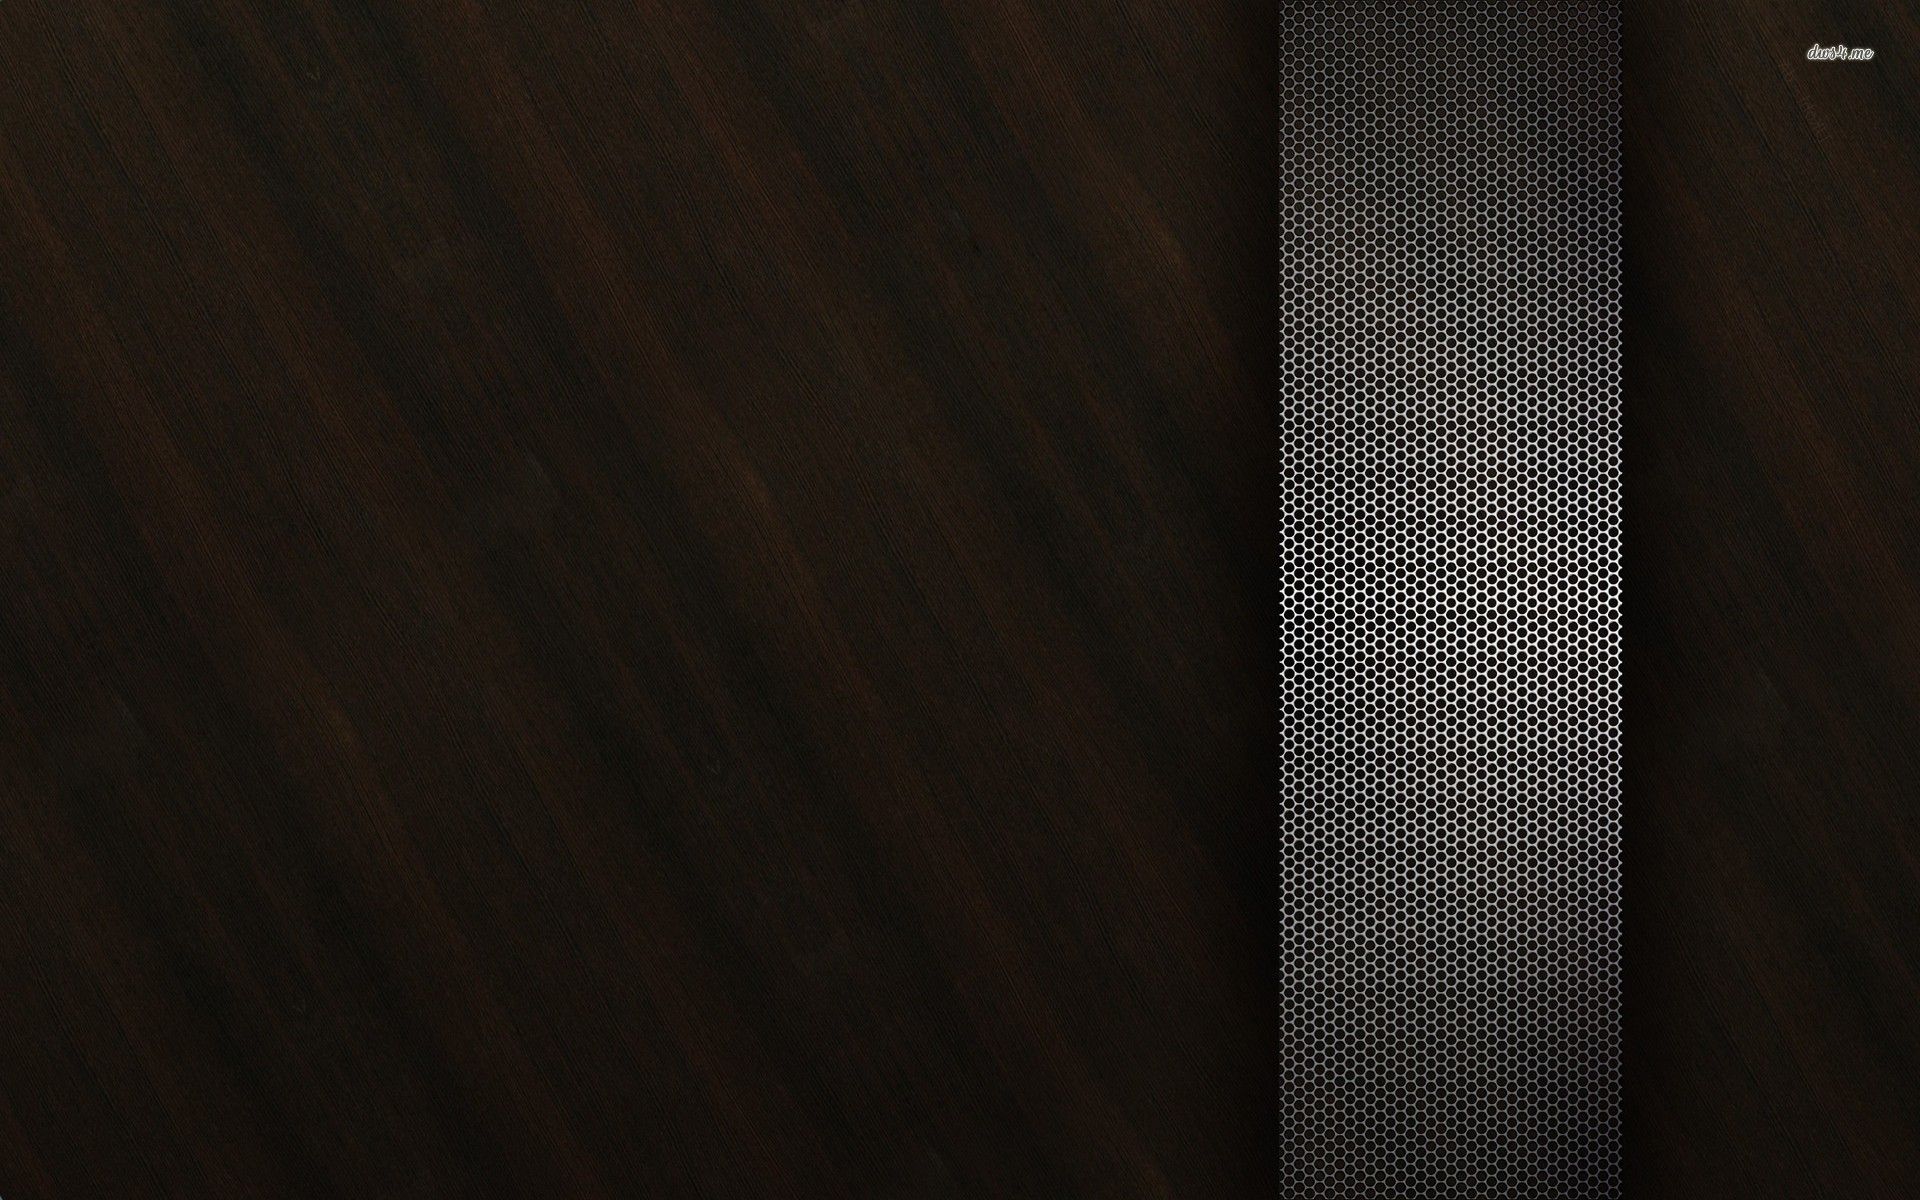 Wood and metal texture wallpaper - Abstract wallpapers